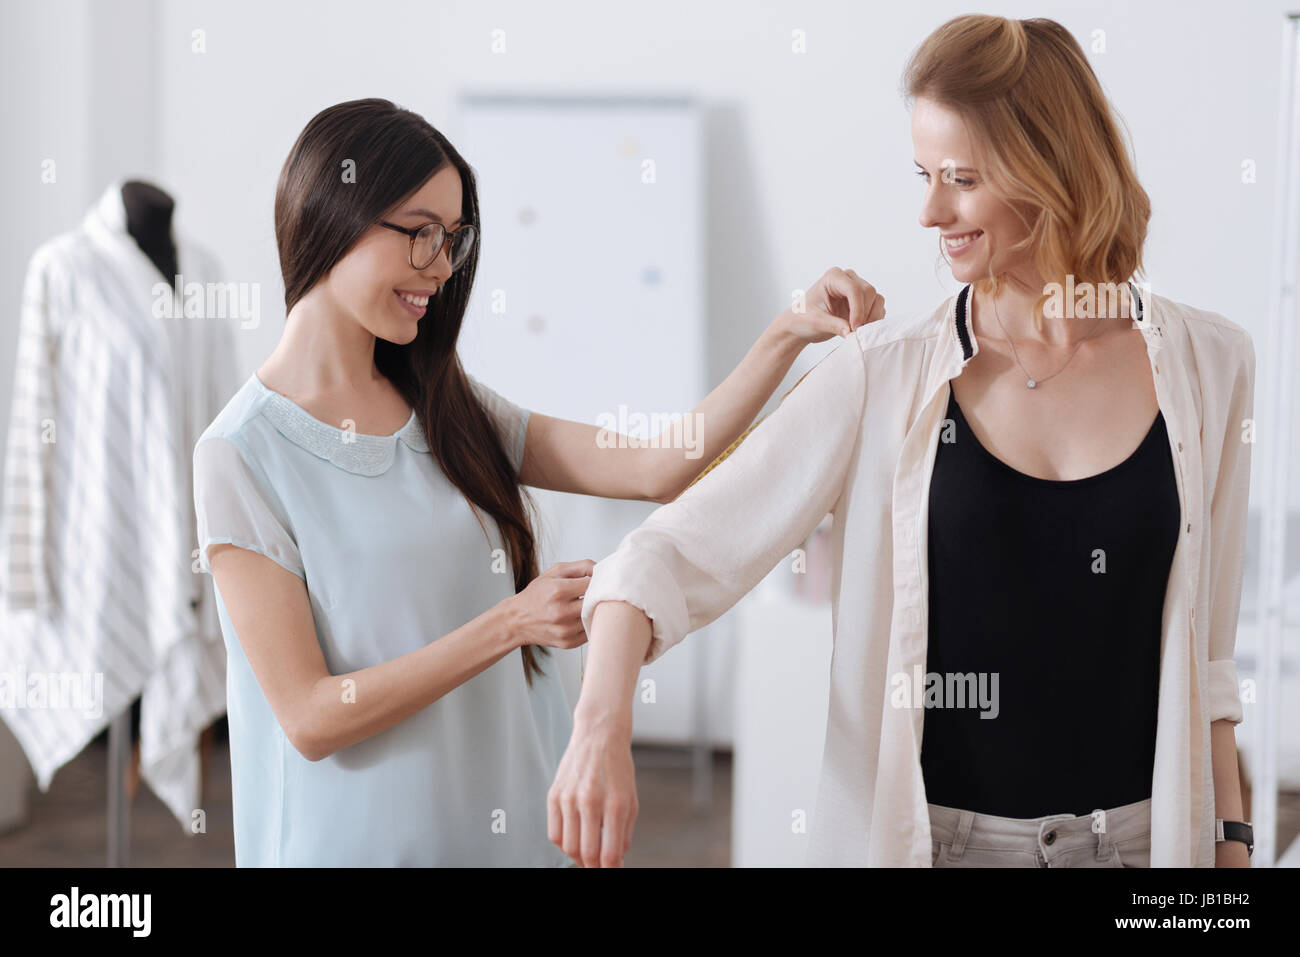 Tailor taking measurements of arm length Stock Photo